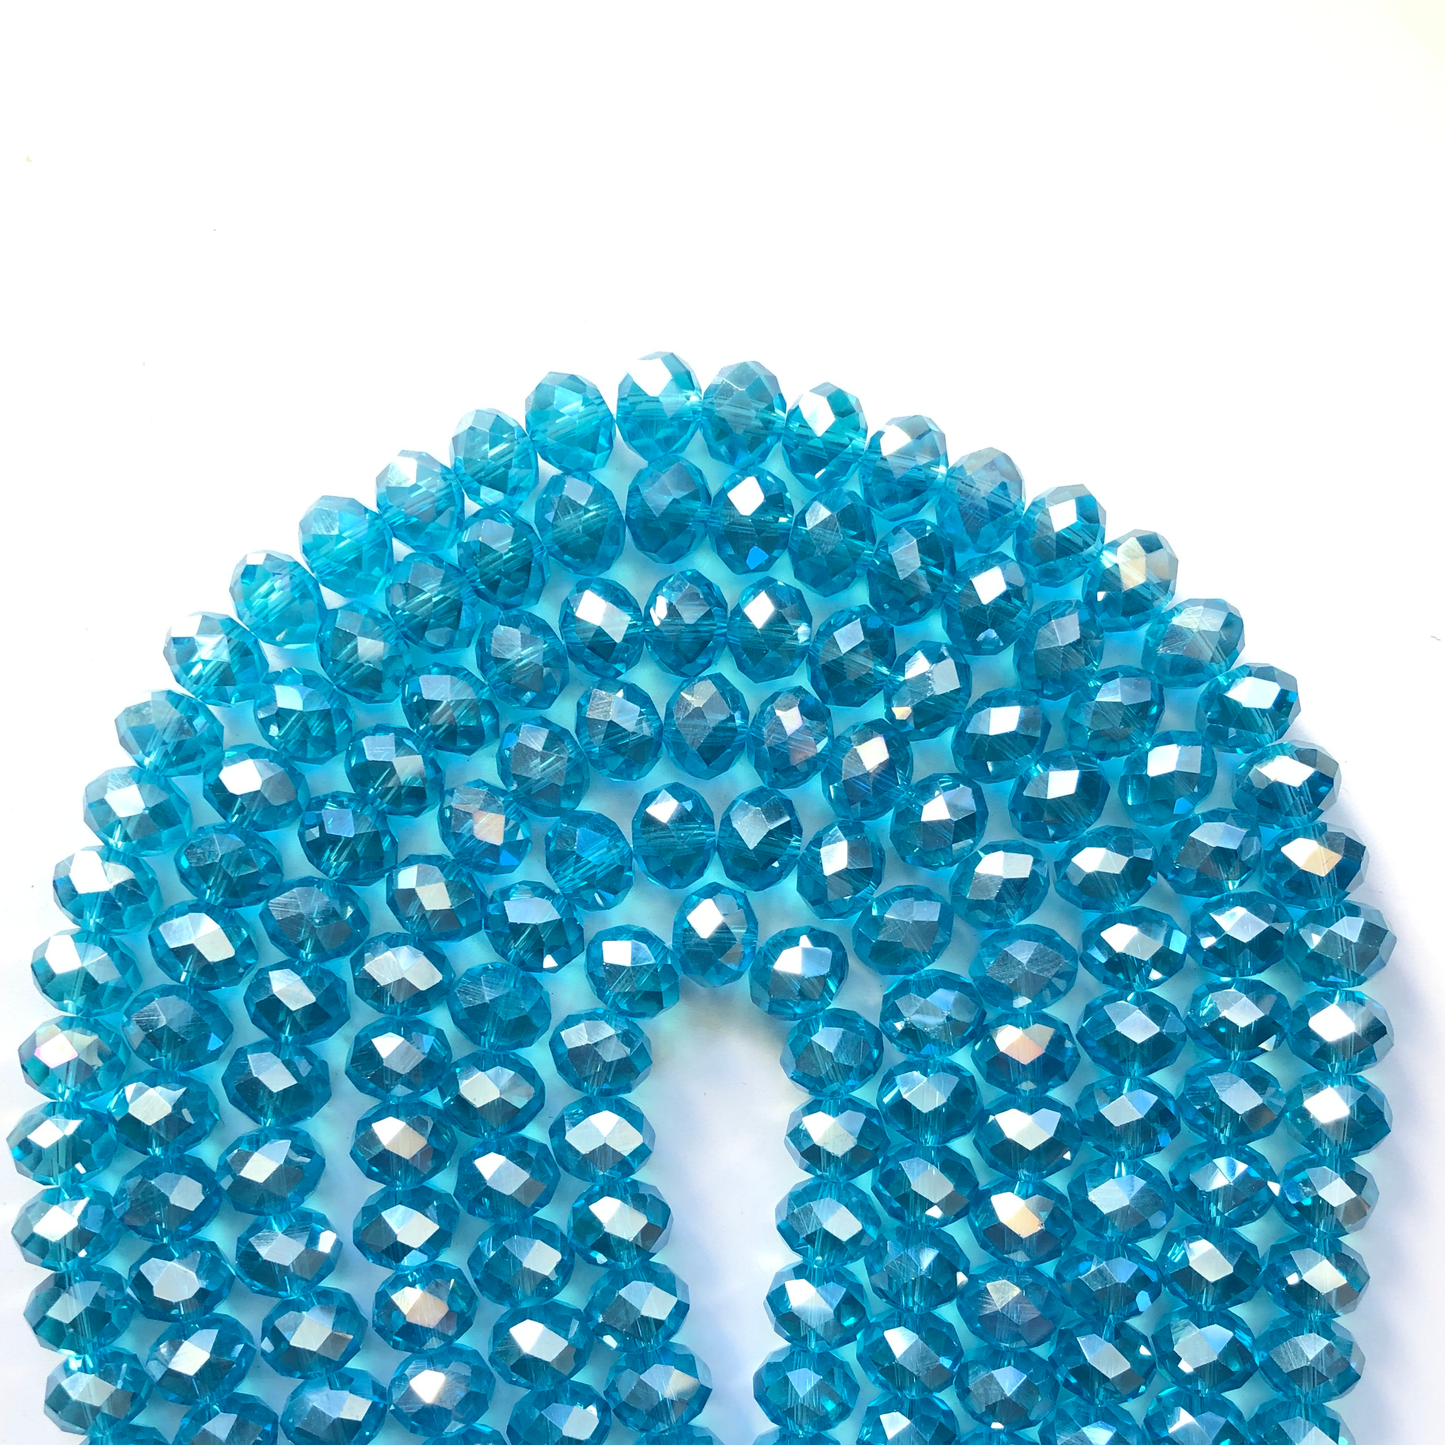 2 Strands/lot 10mm Clear Turquoise AB Faceted Glass Beads Glass Beads Faceted Glass Beads Charms Beads Beyond